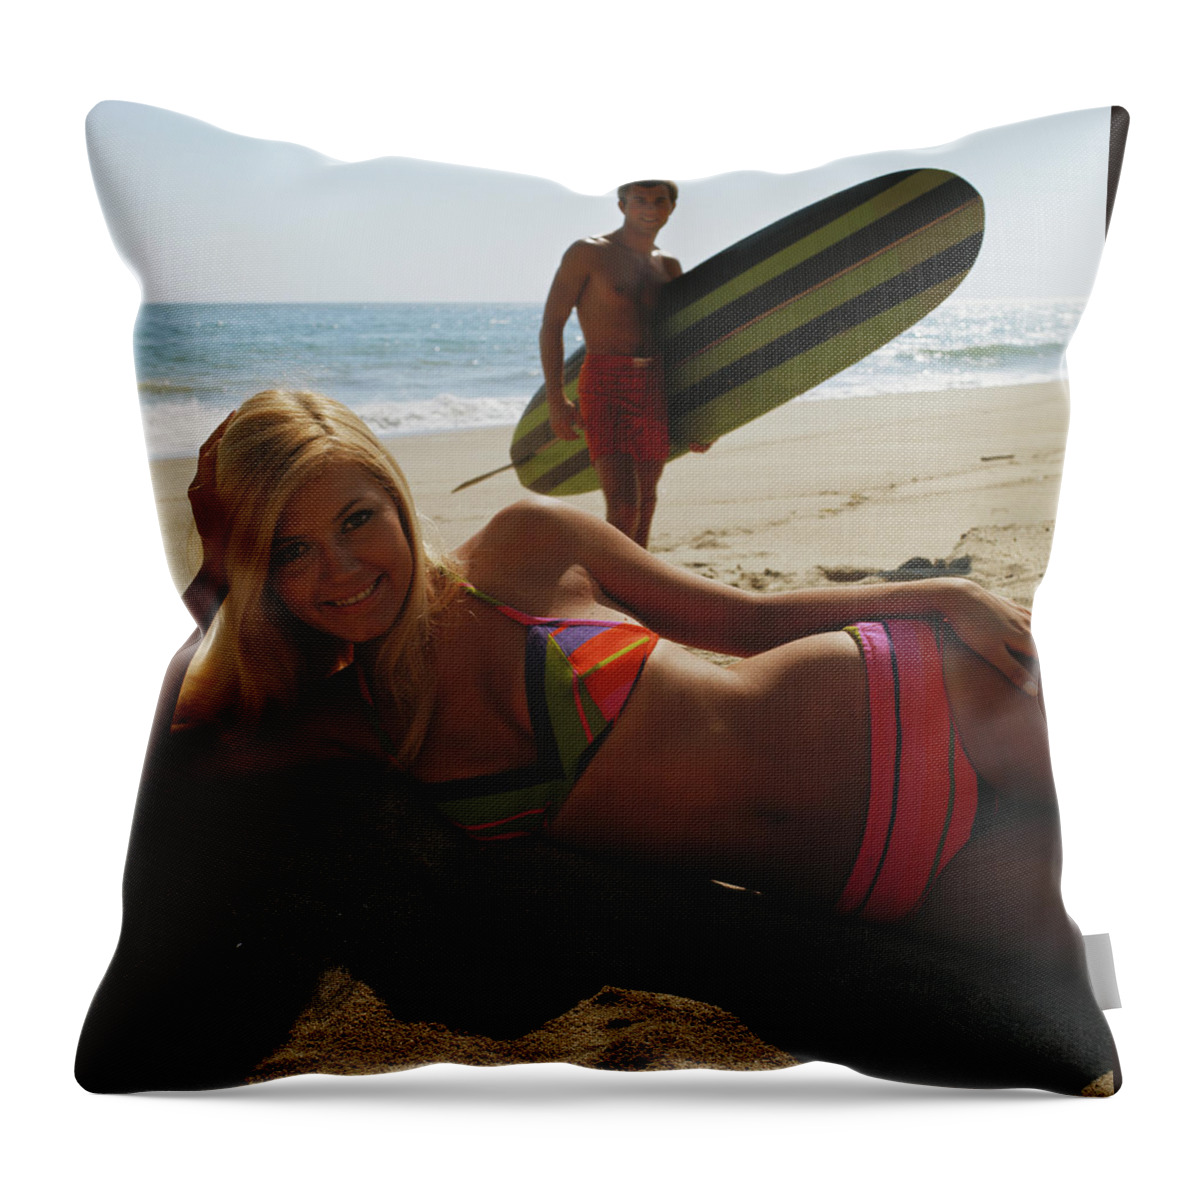 Young Men Throw Pillow featuring the photograph Young Woman Lying On Beach With Man by Tom Kelley Archive